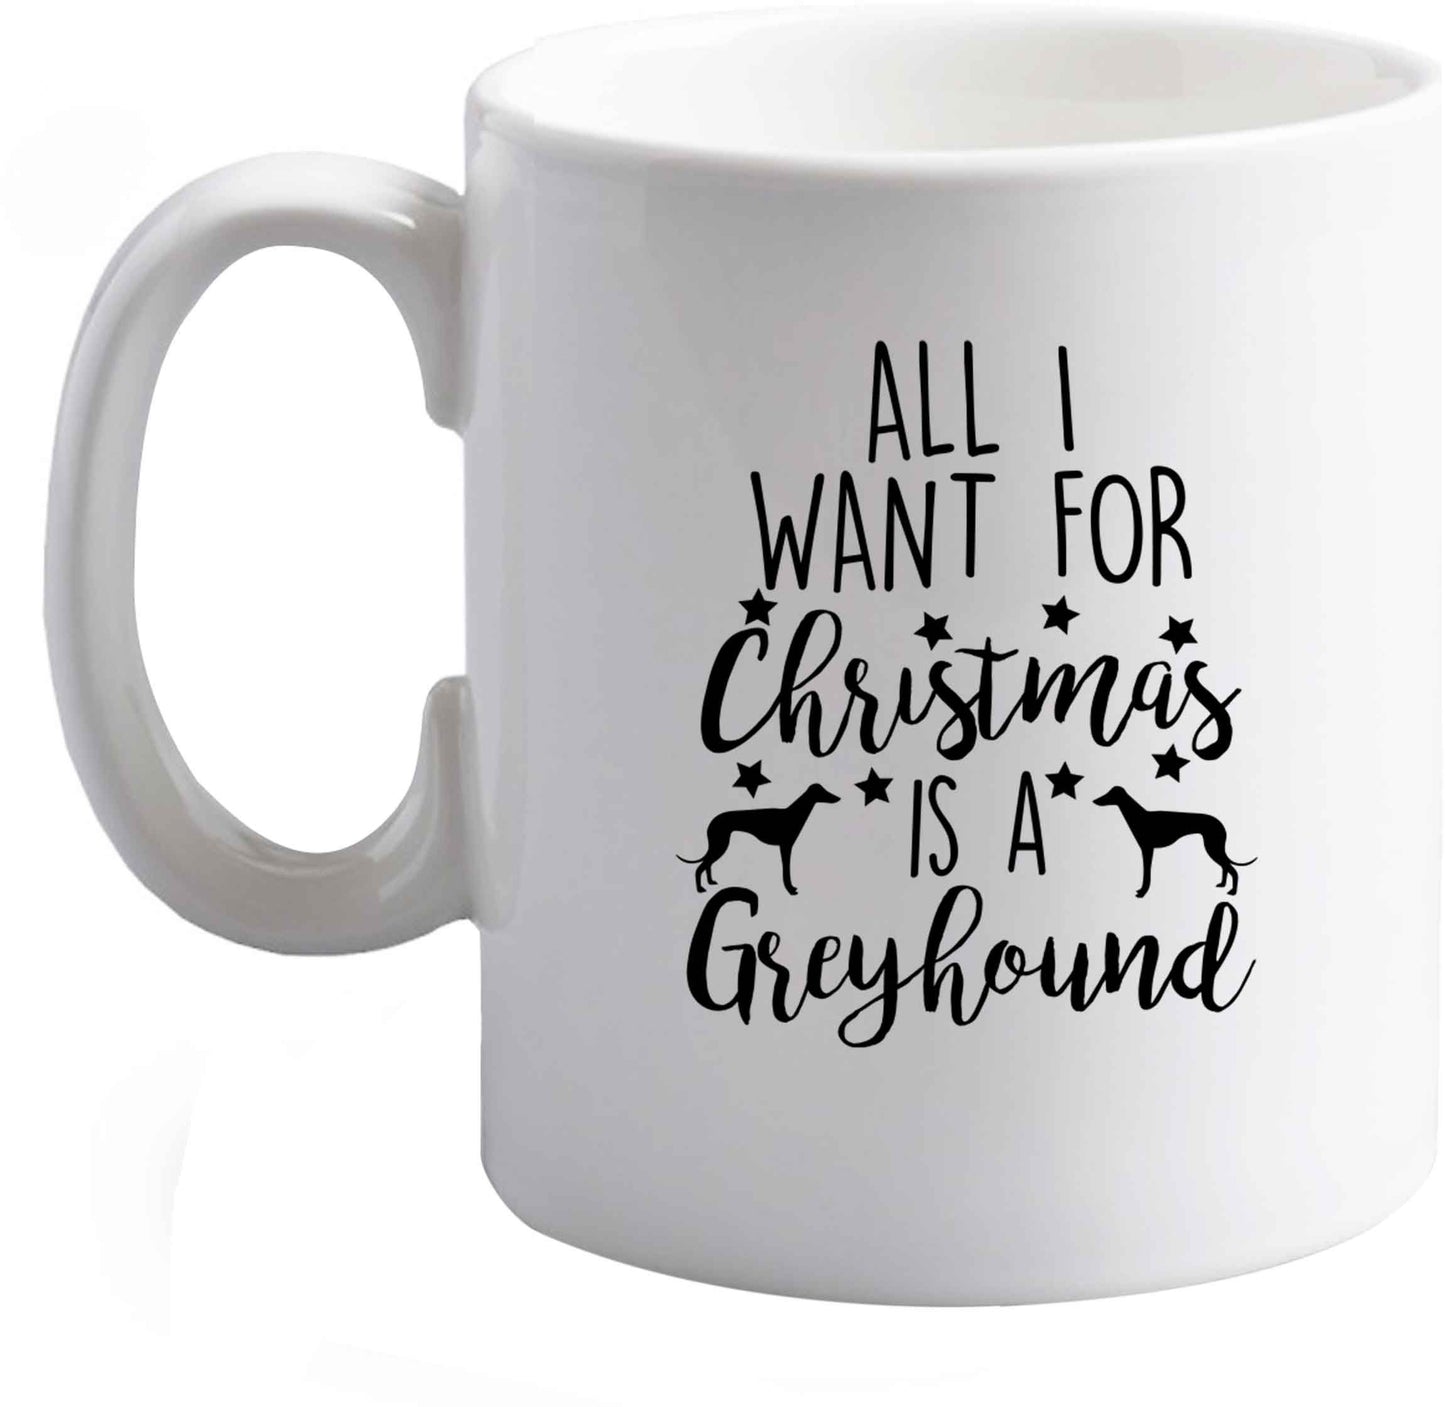 10 oz All I want for Christmas is a greyhound ceramic mug right handed